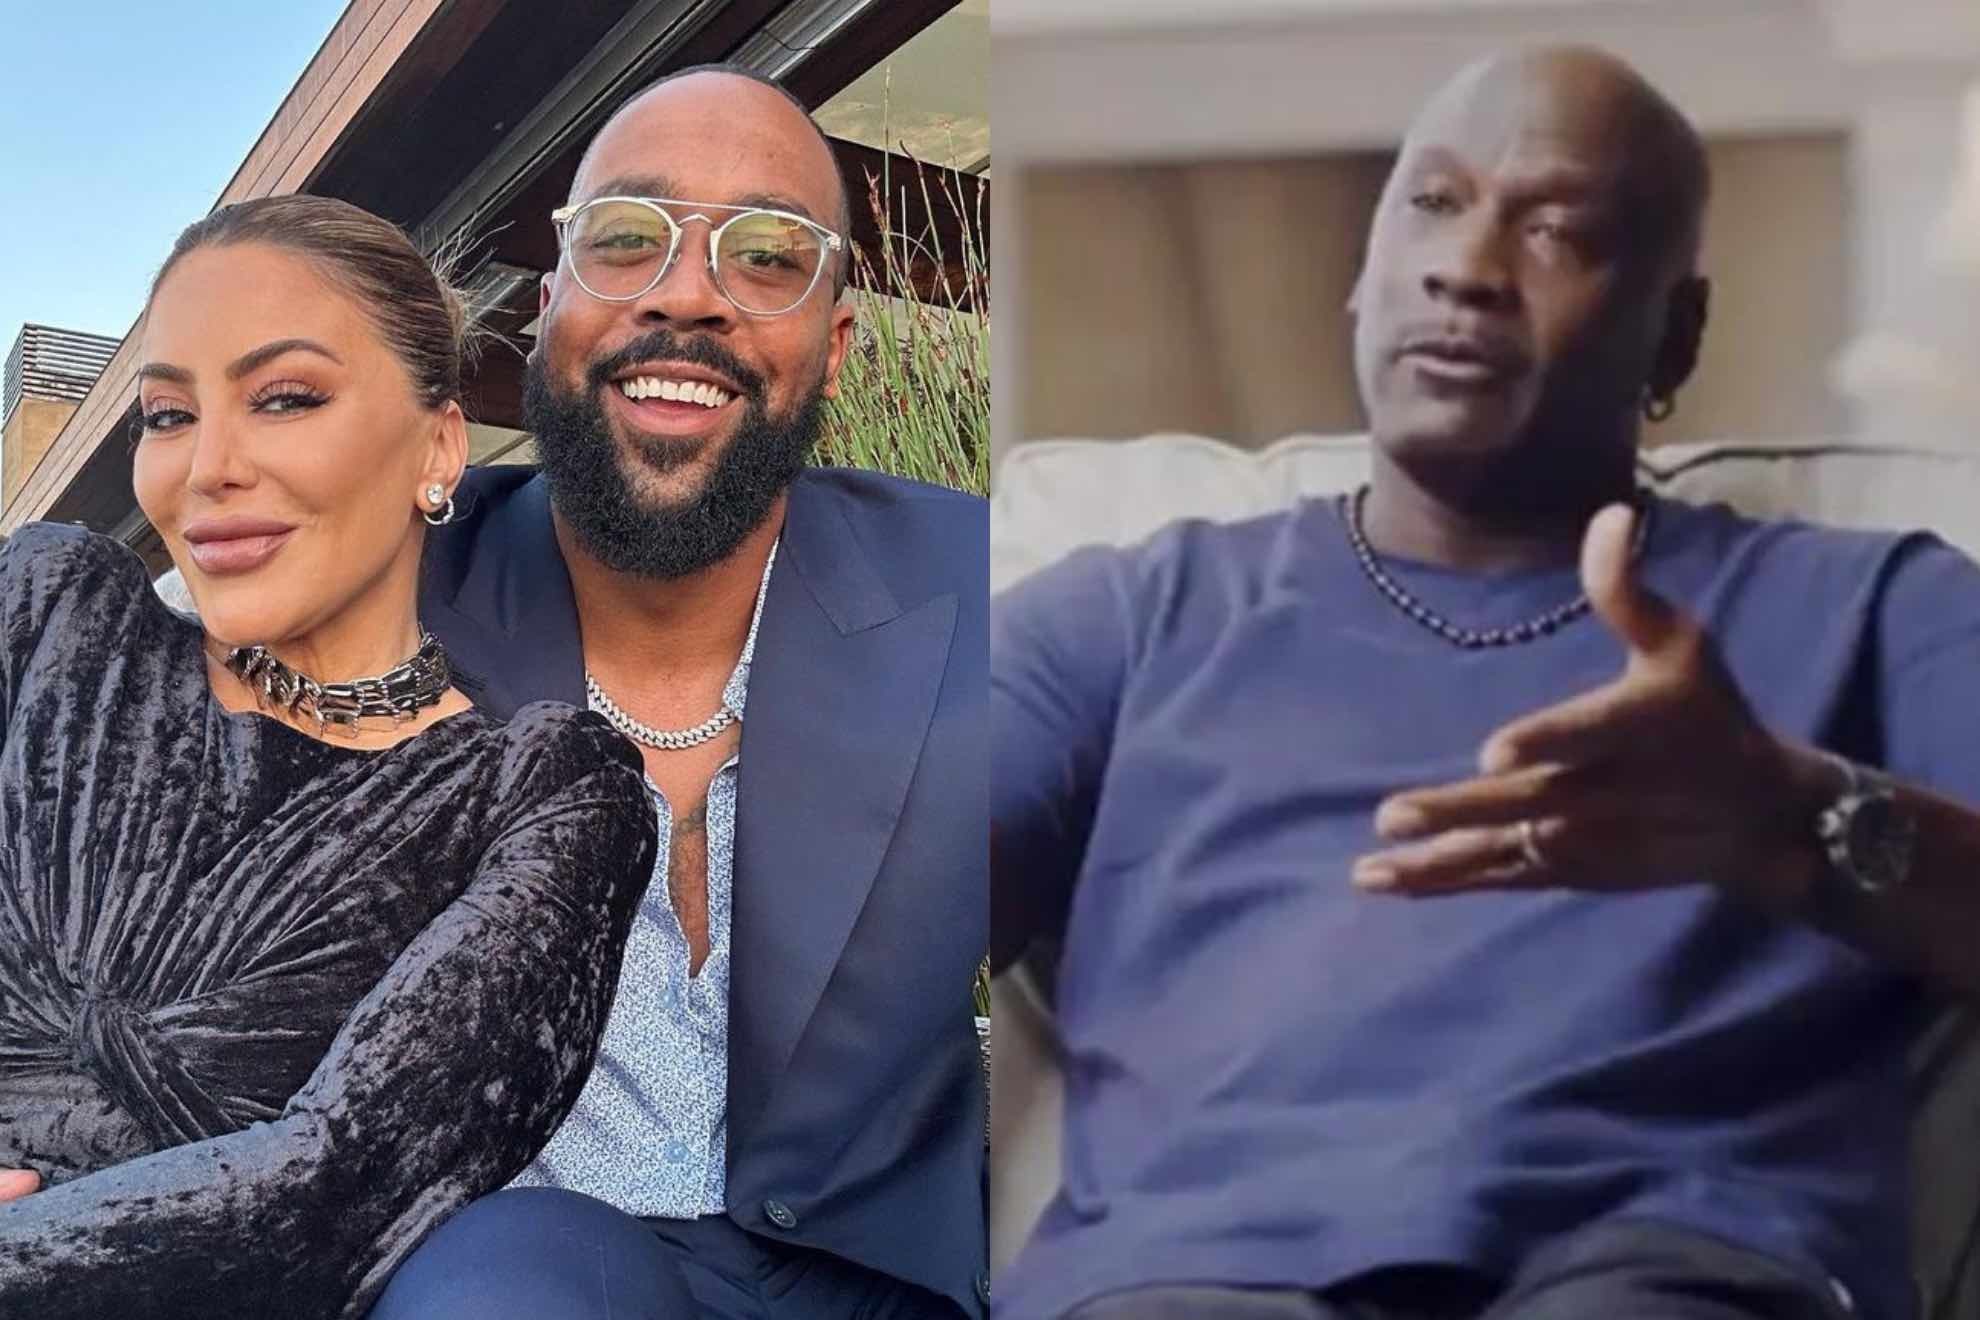 Michael Jordan had a harsh message for his son about getting married to Scottie Pippens ex-wife